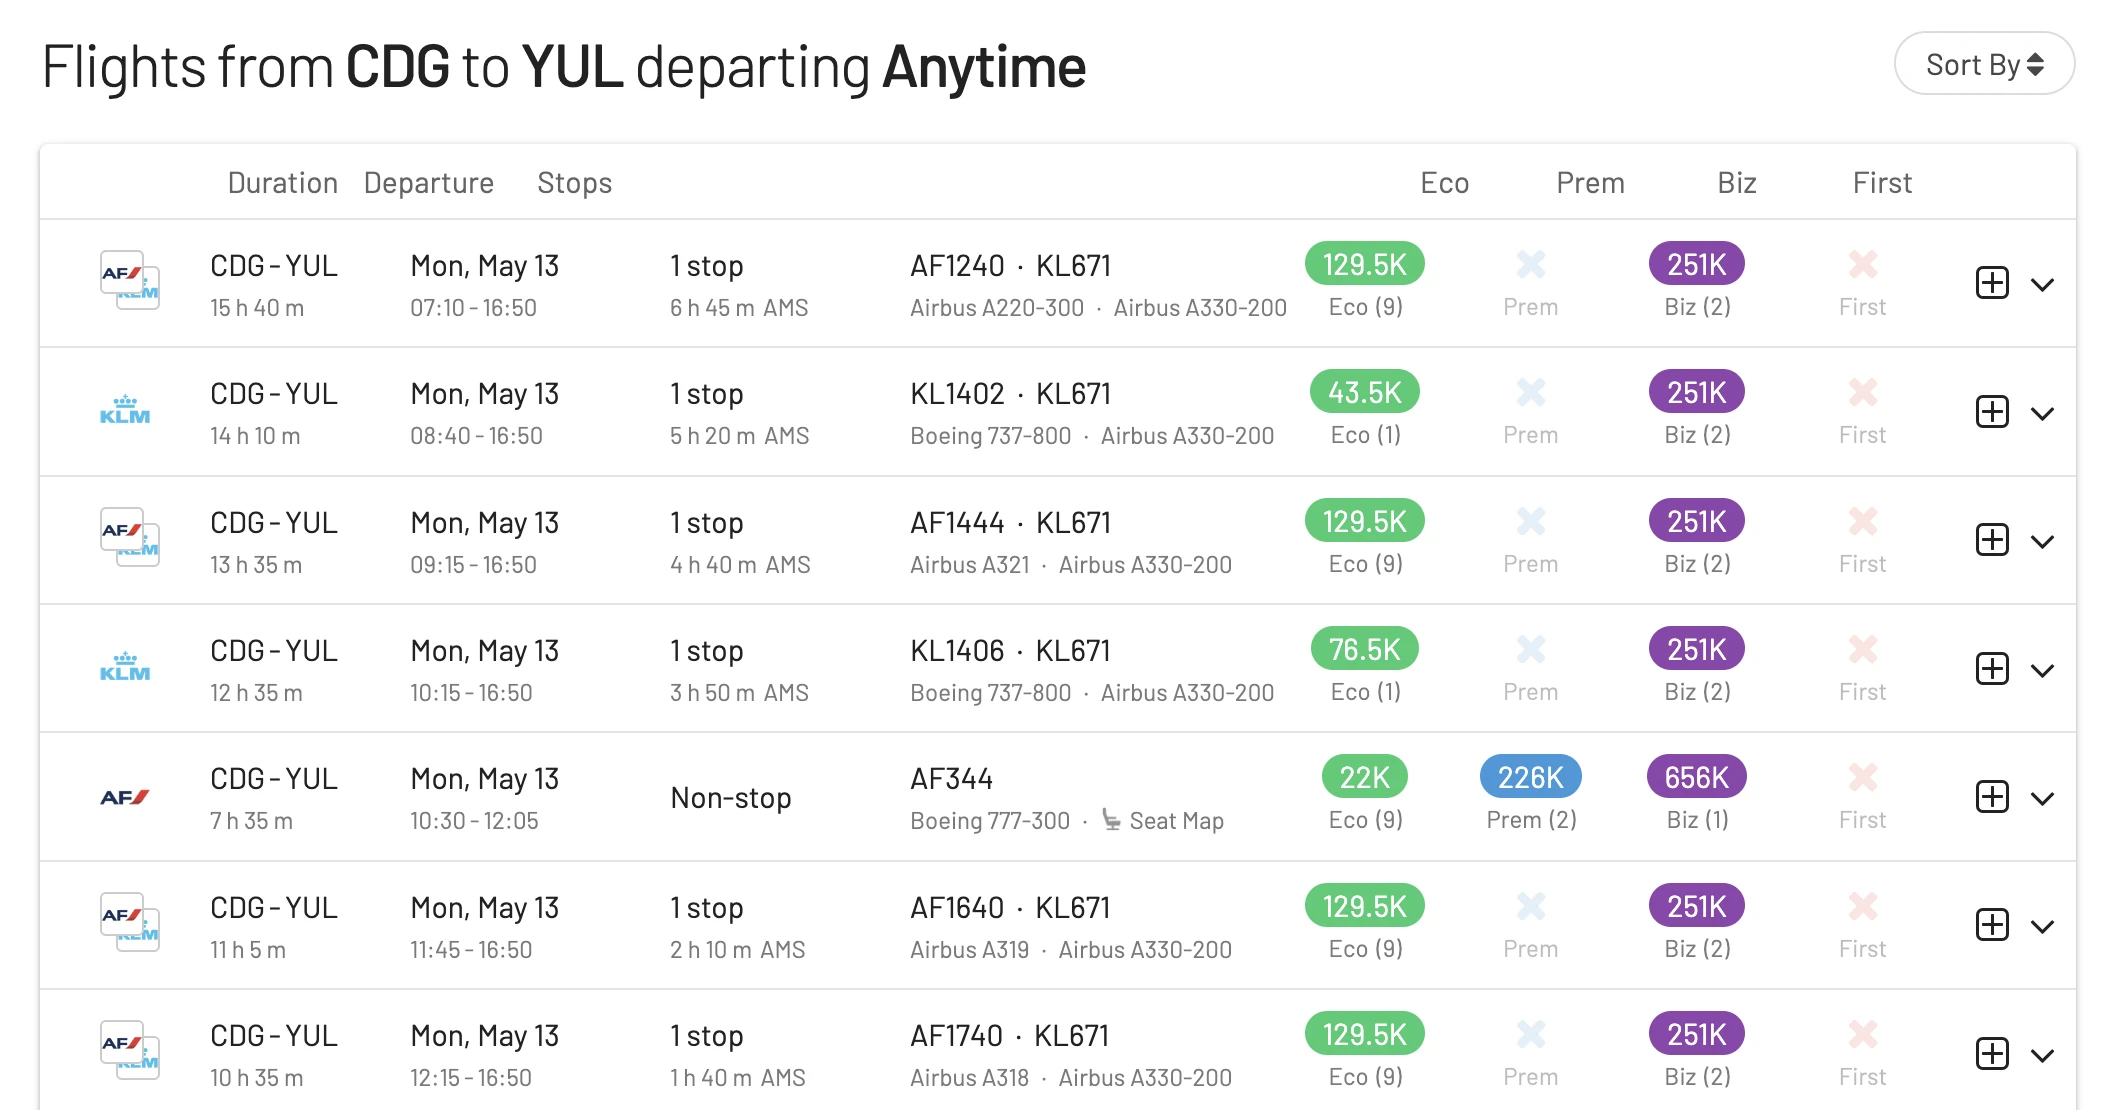 Search results for award flights on AwardFares (List View).